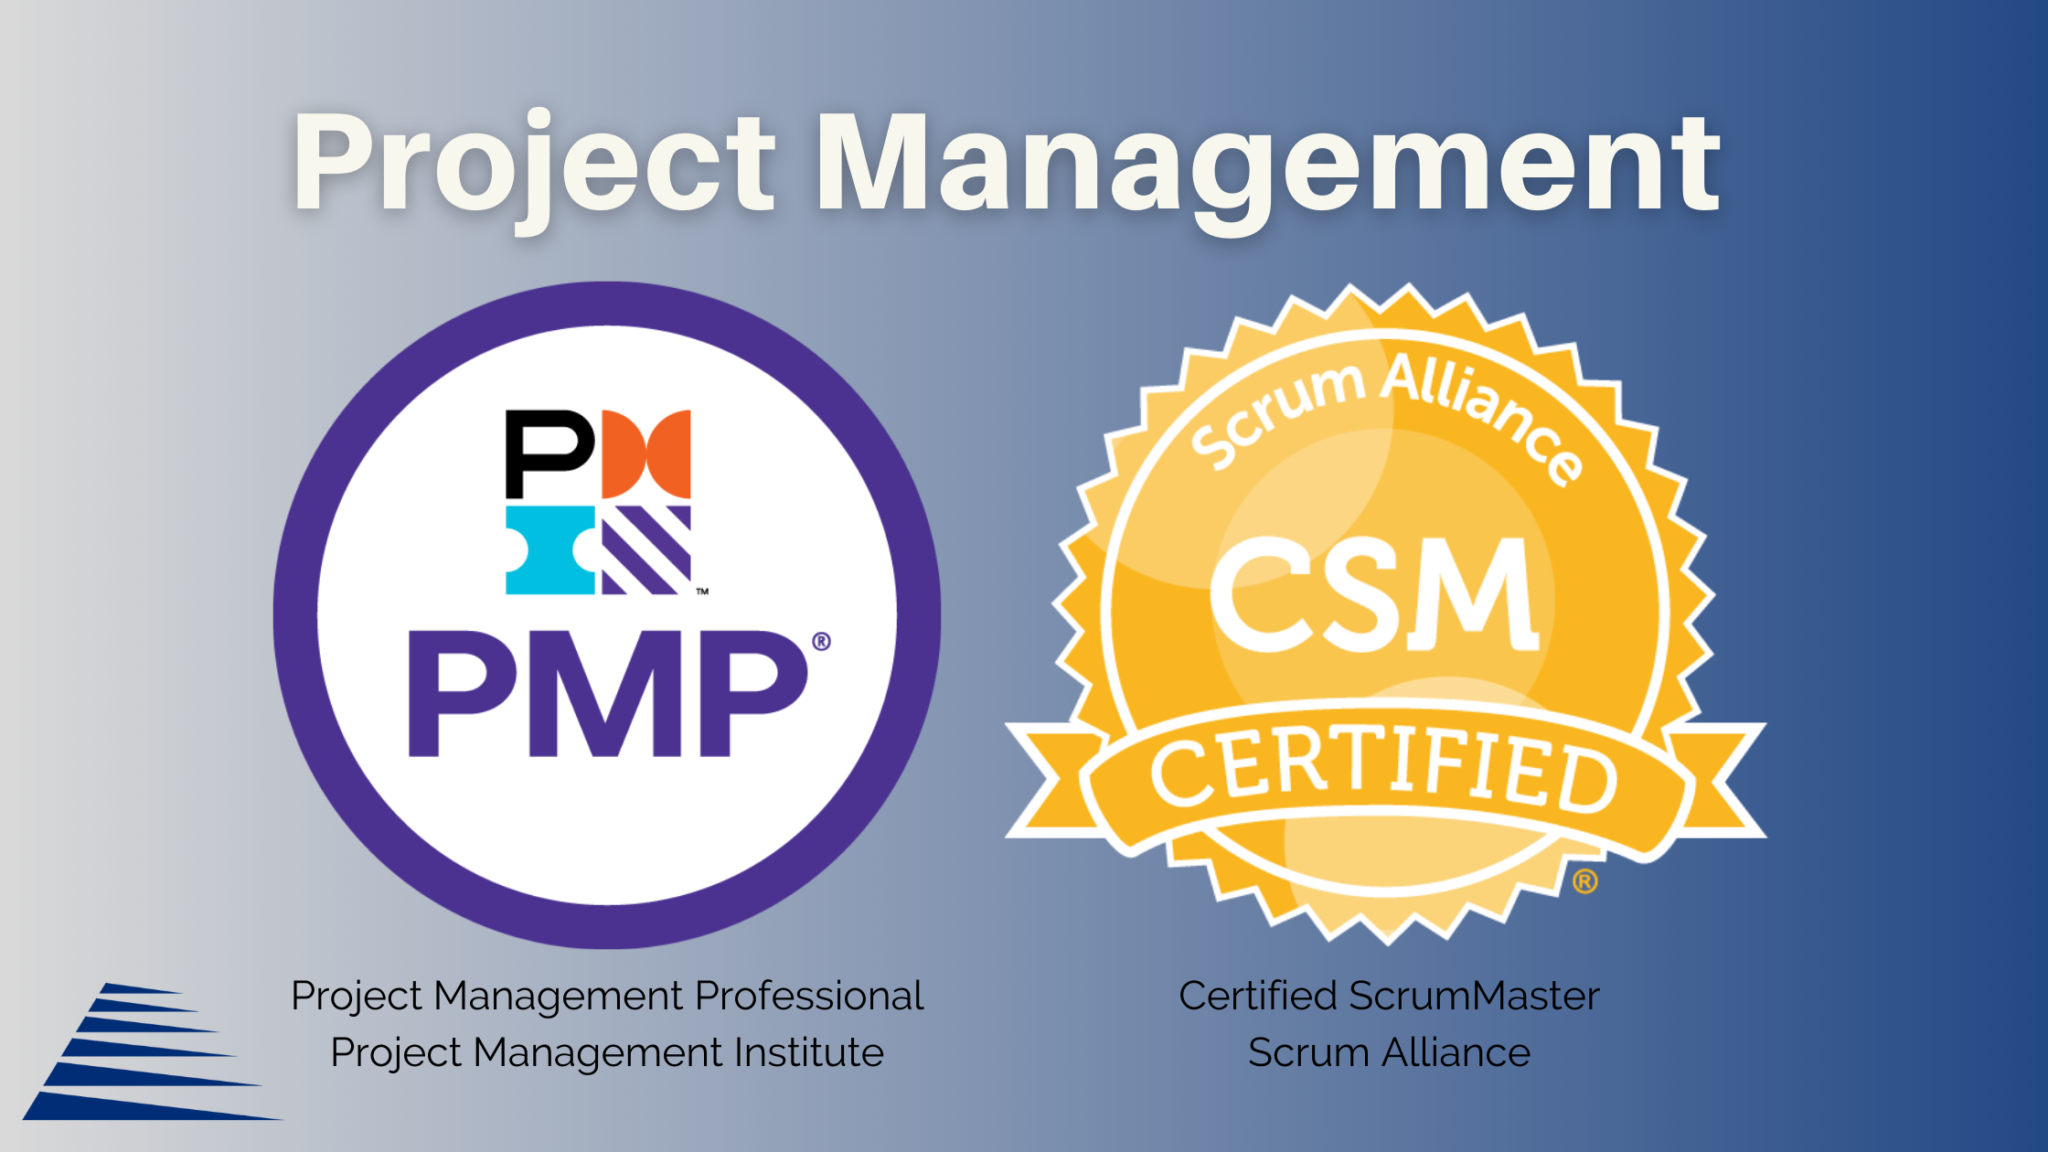 Project Management certification, PMP Certification and CSM Certification logo